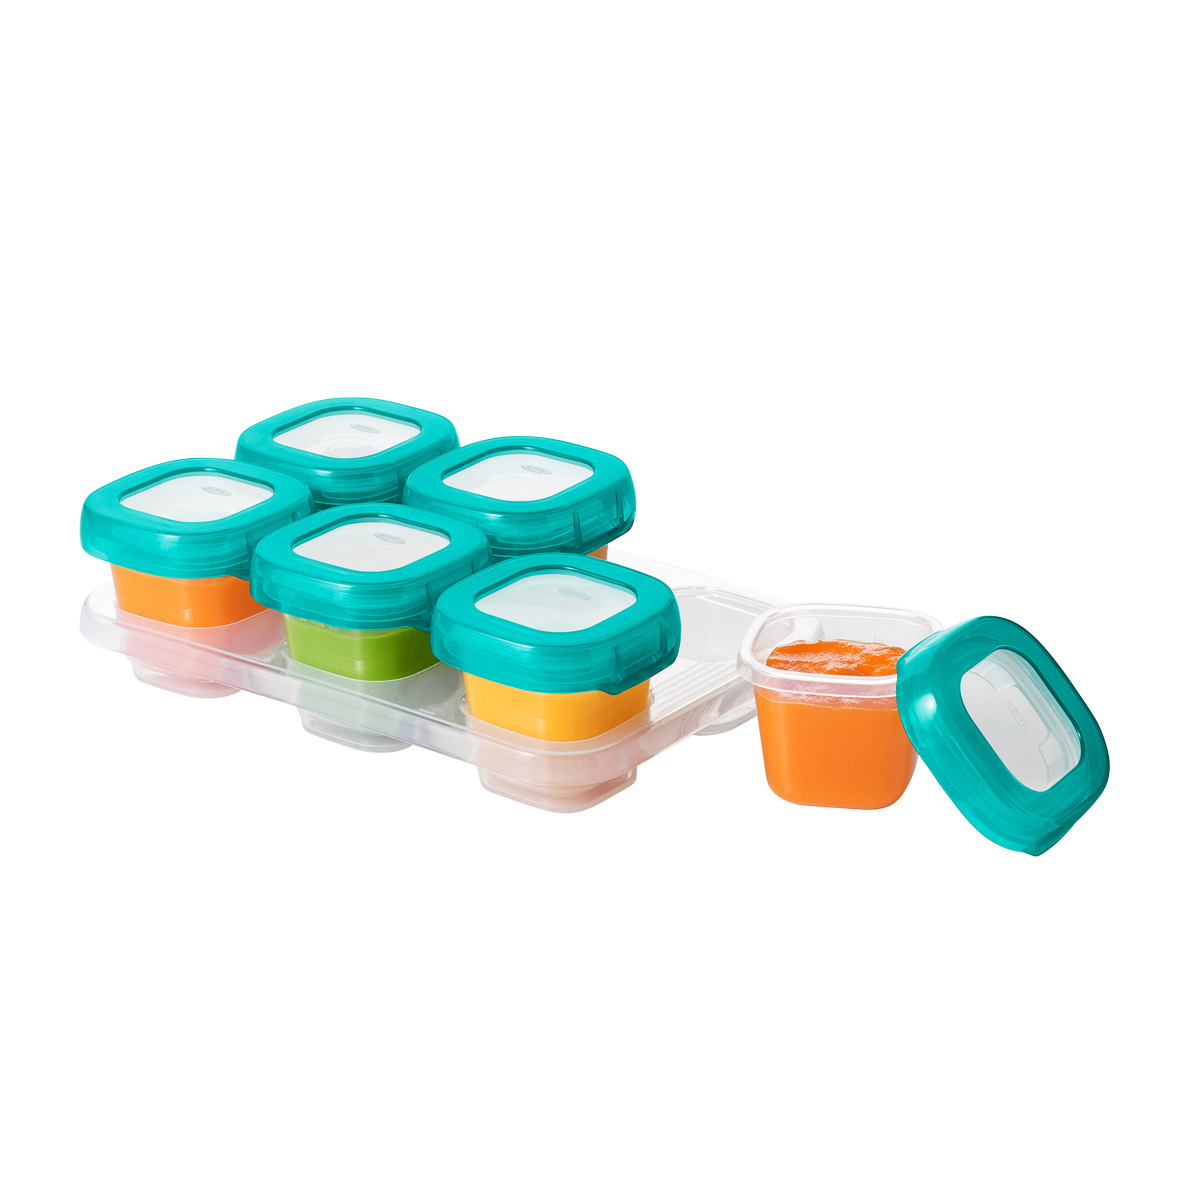 OXO Tot Silicone Bowl Teal